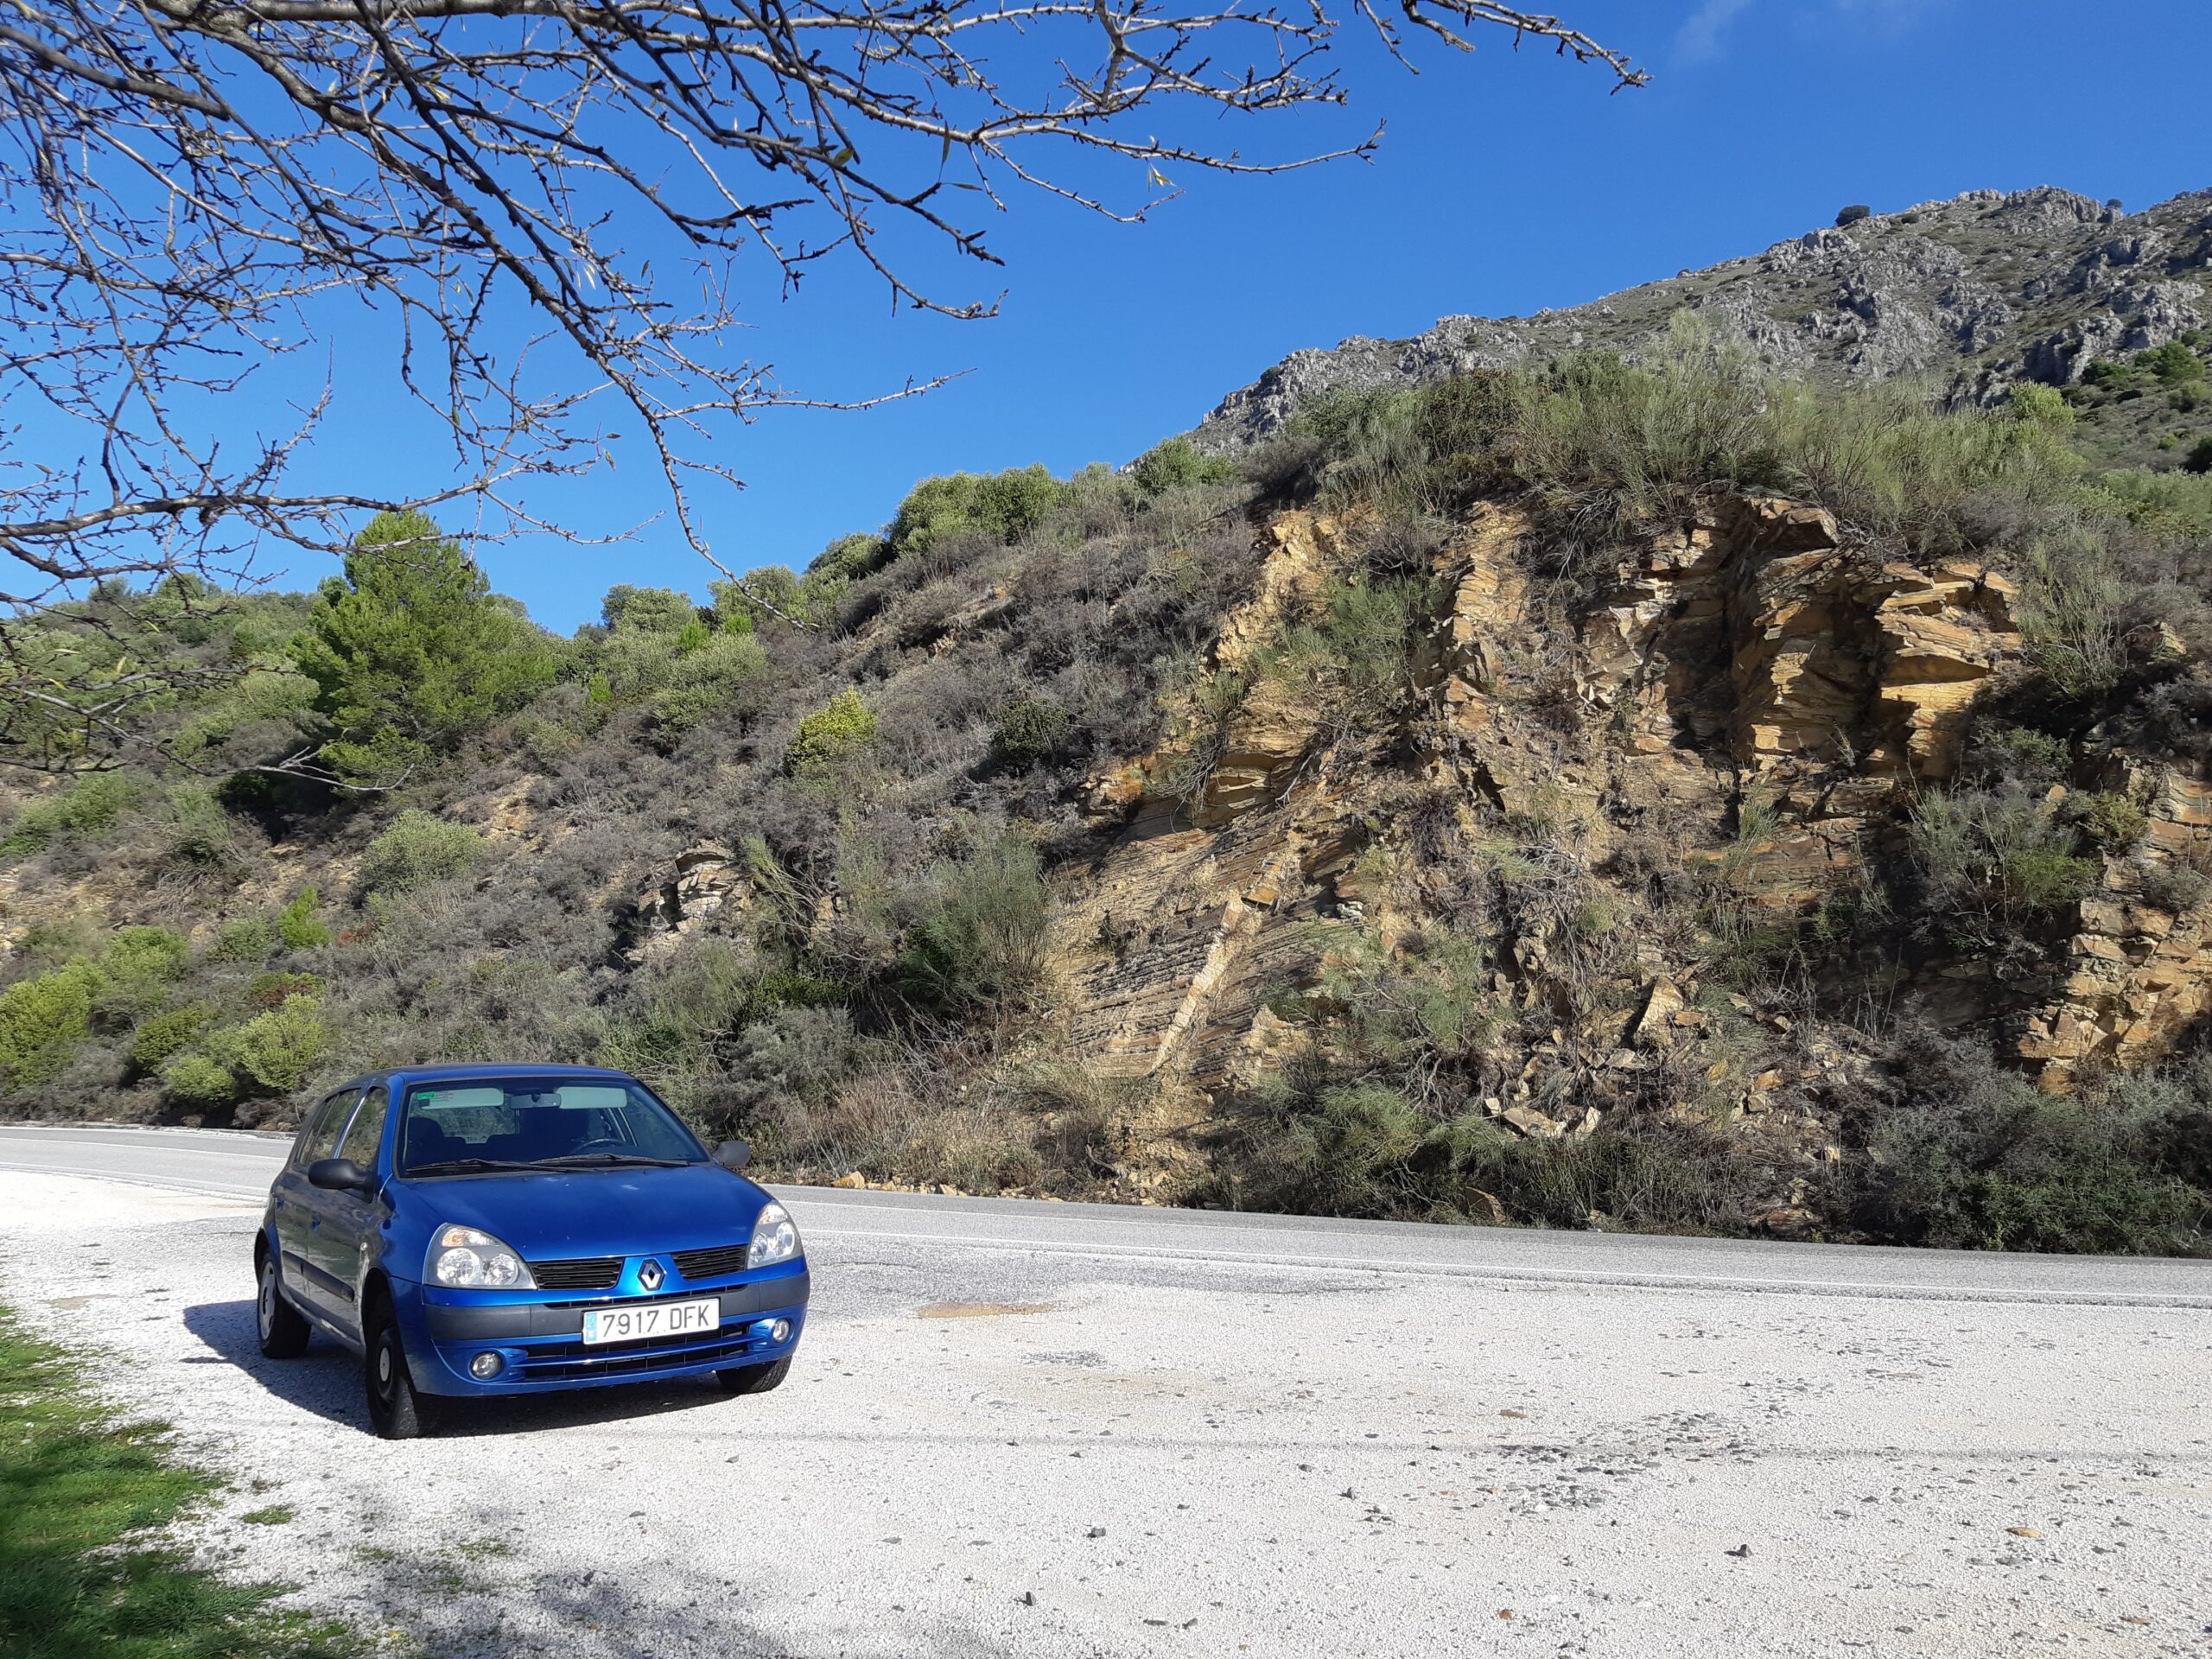 Amovens. Hire cars in Spain 2